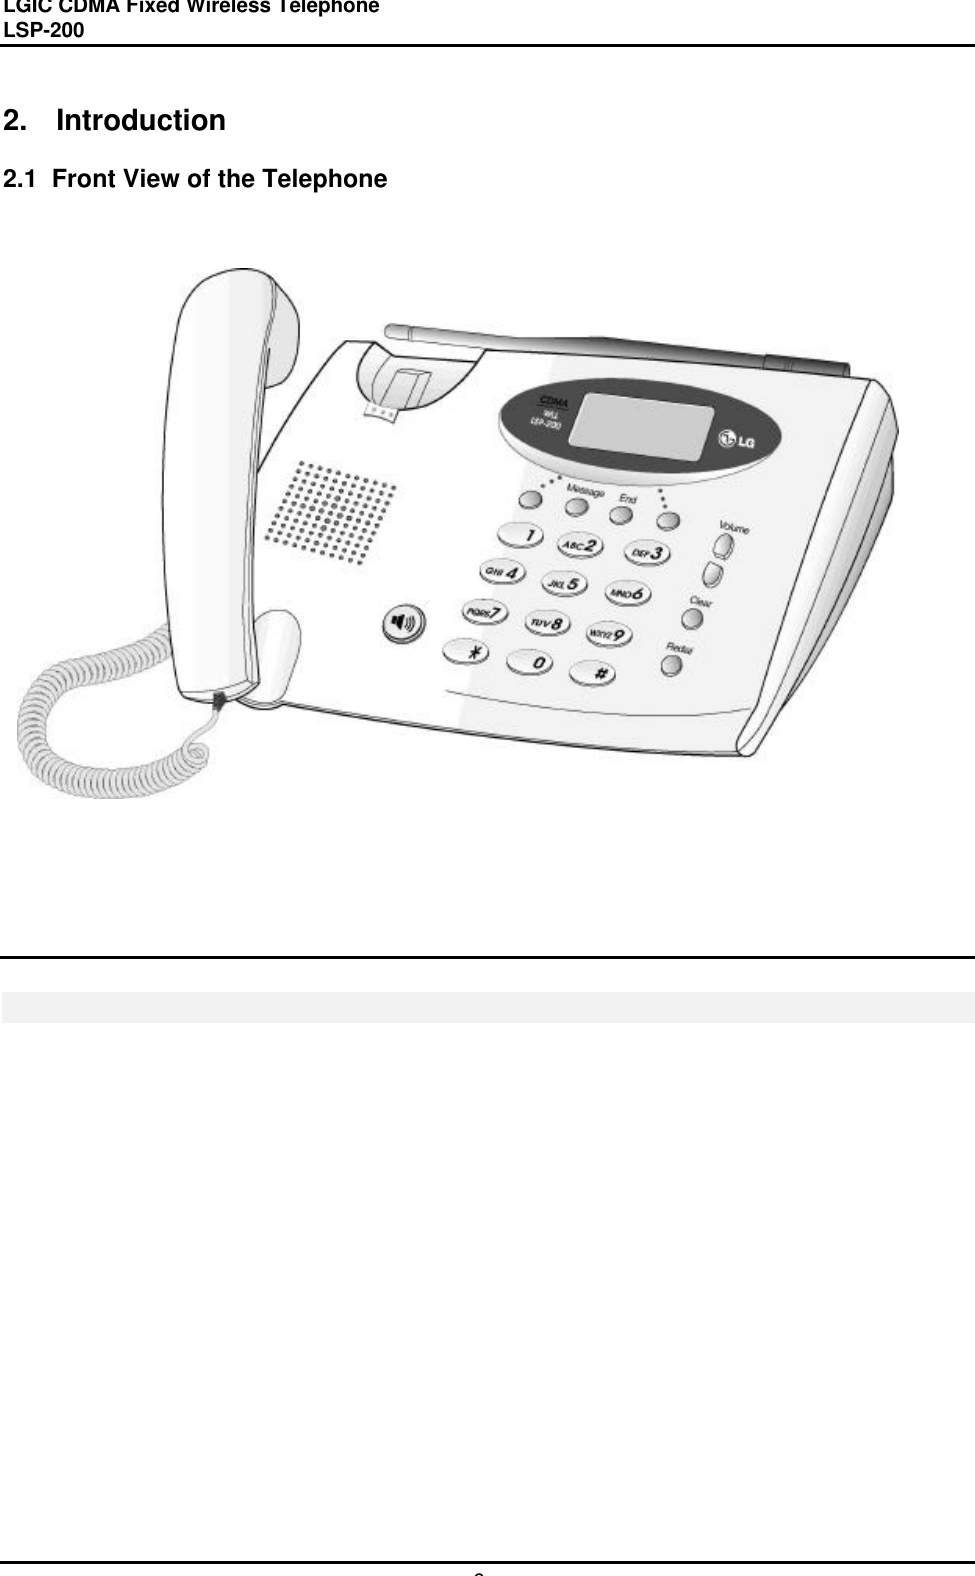 LGIC CDMA Fixed Wireless TelephoneLSP-20092. Introduction2.1  Front View of the Telephone